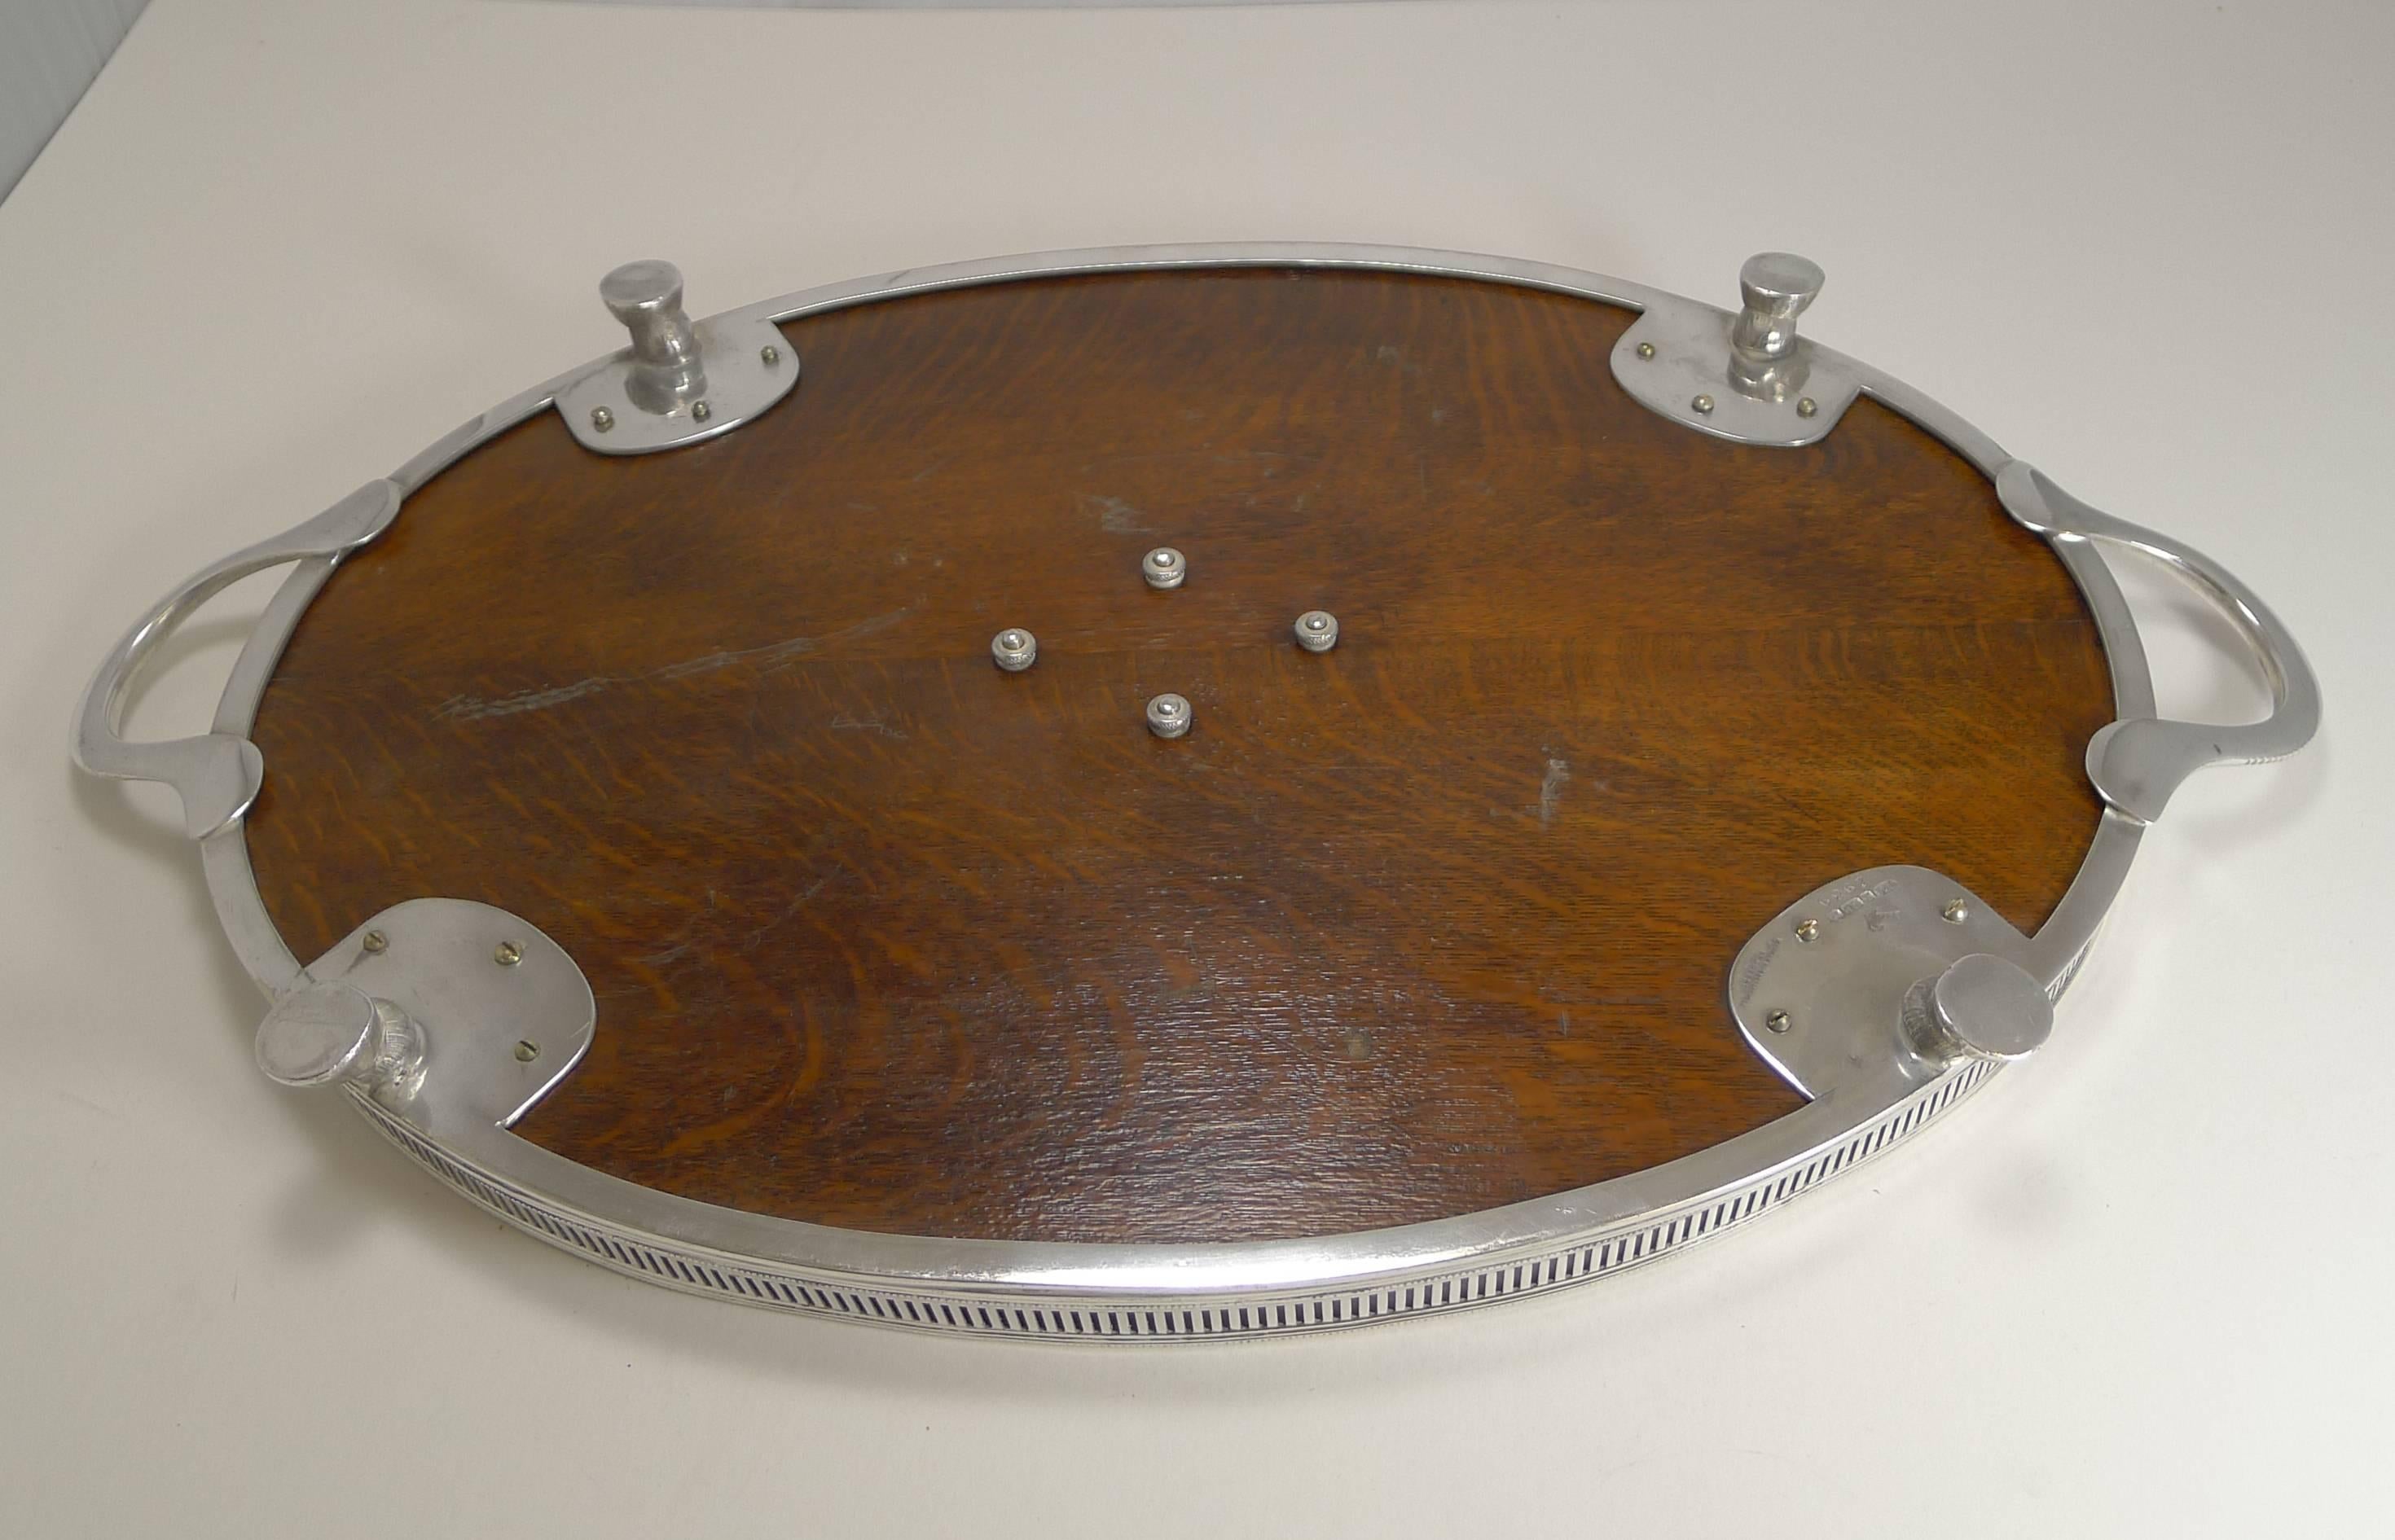 A delightful and highly sought-after tray by the well renowned silversmith, Roberts and Belk and dating to circa 1890-1900.

What makes this a charming example are the four original horse hoof feet which it sits on. The solid English oak base is